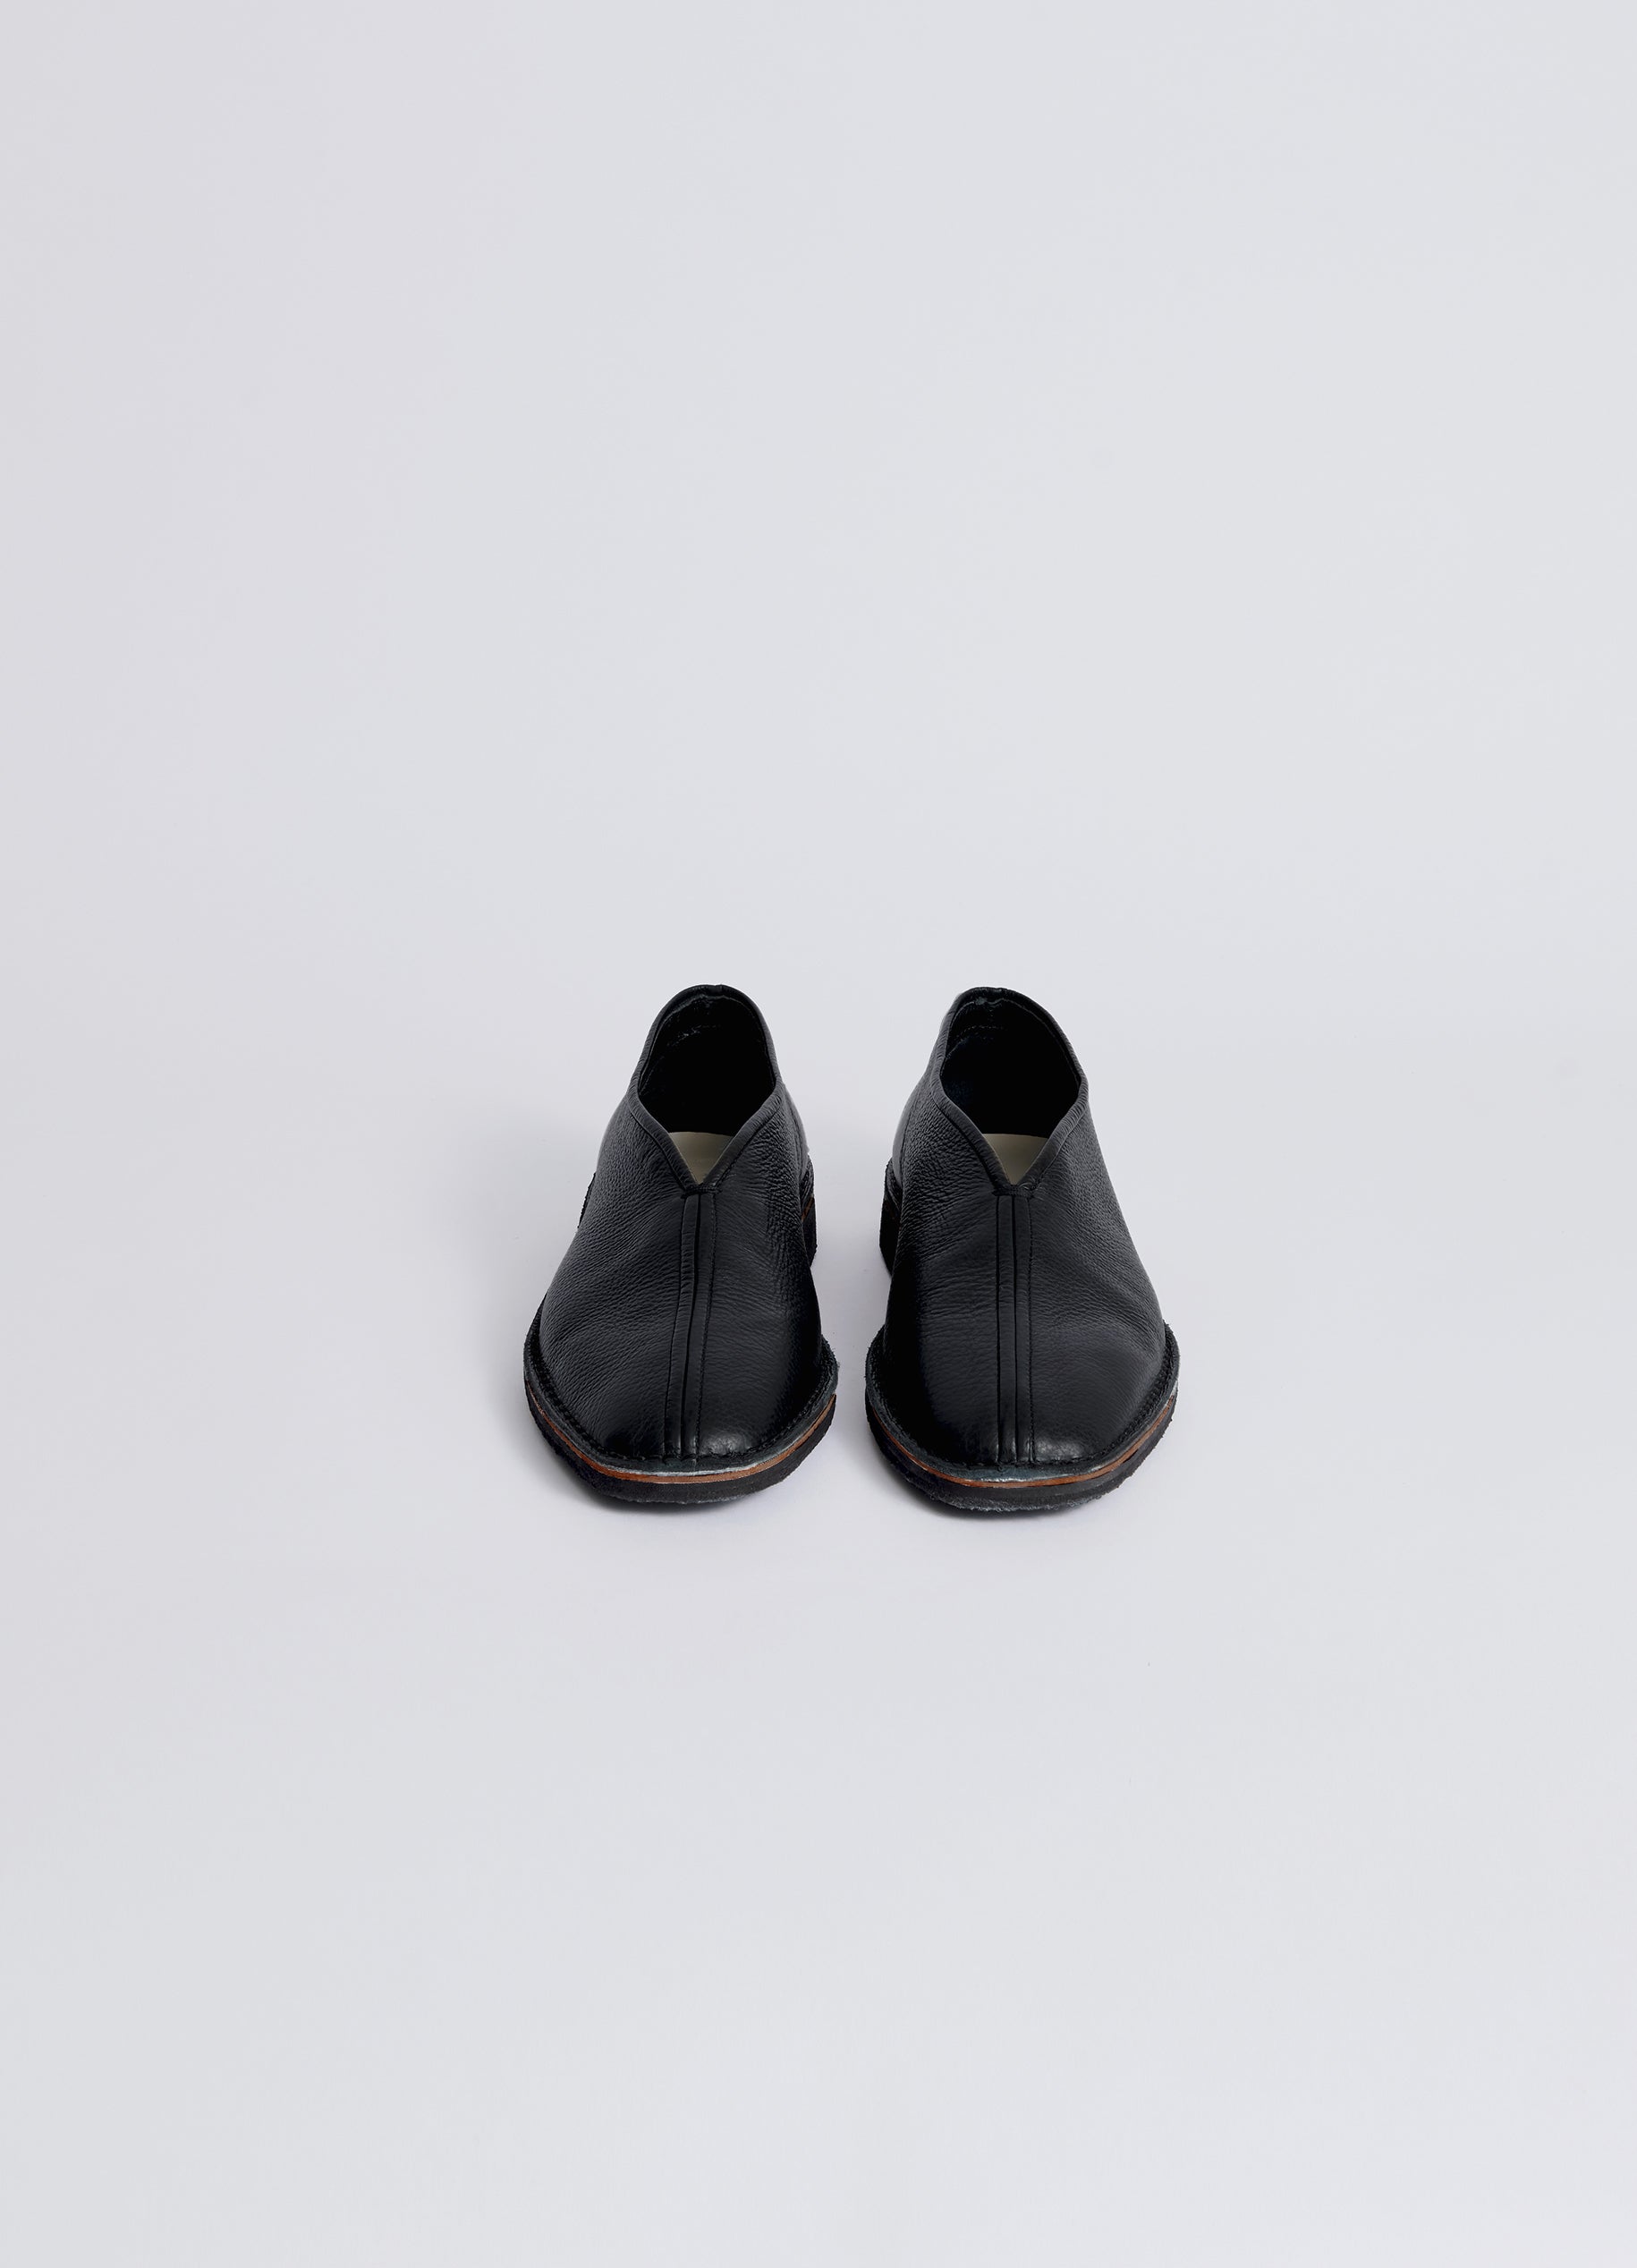 black chinese slippers